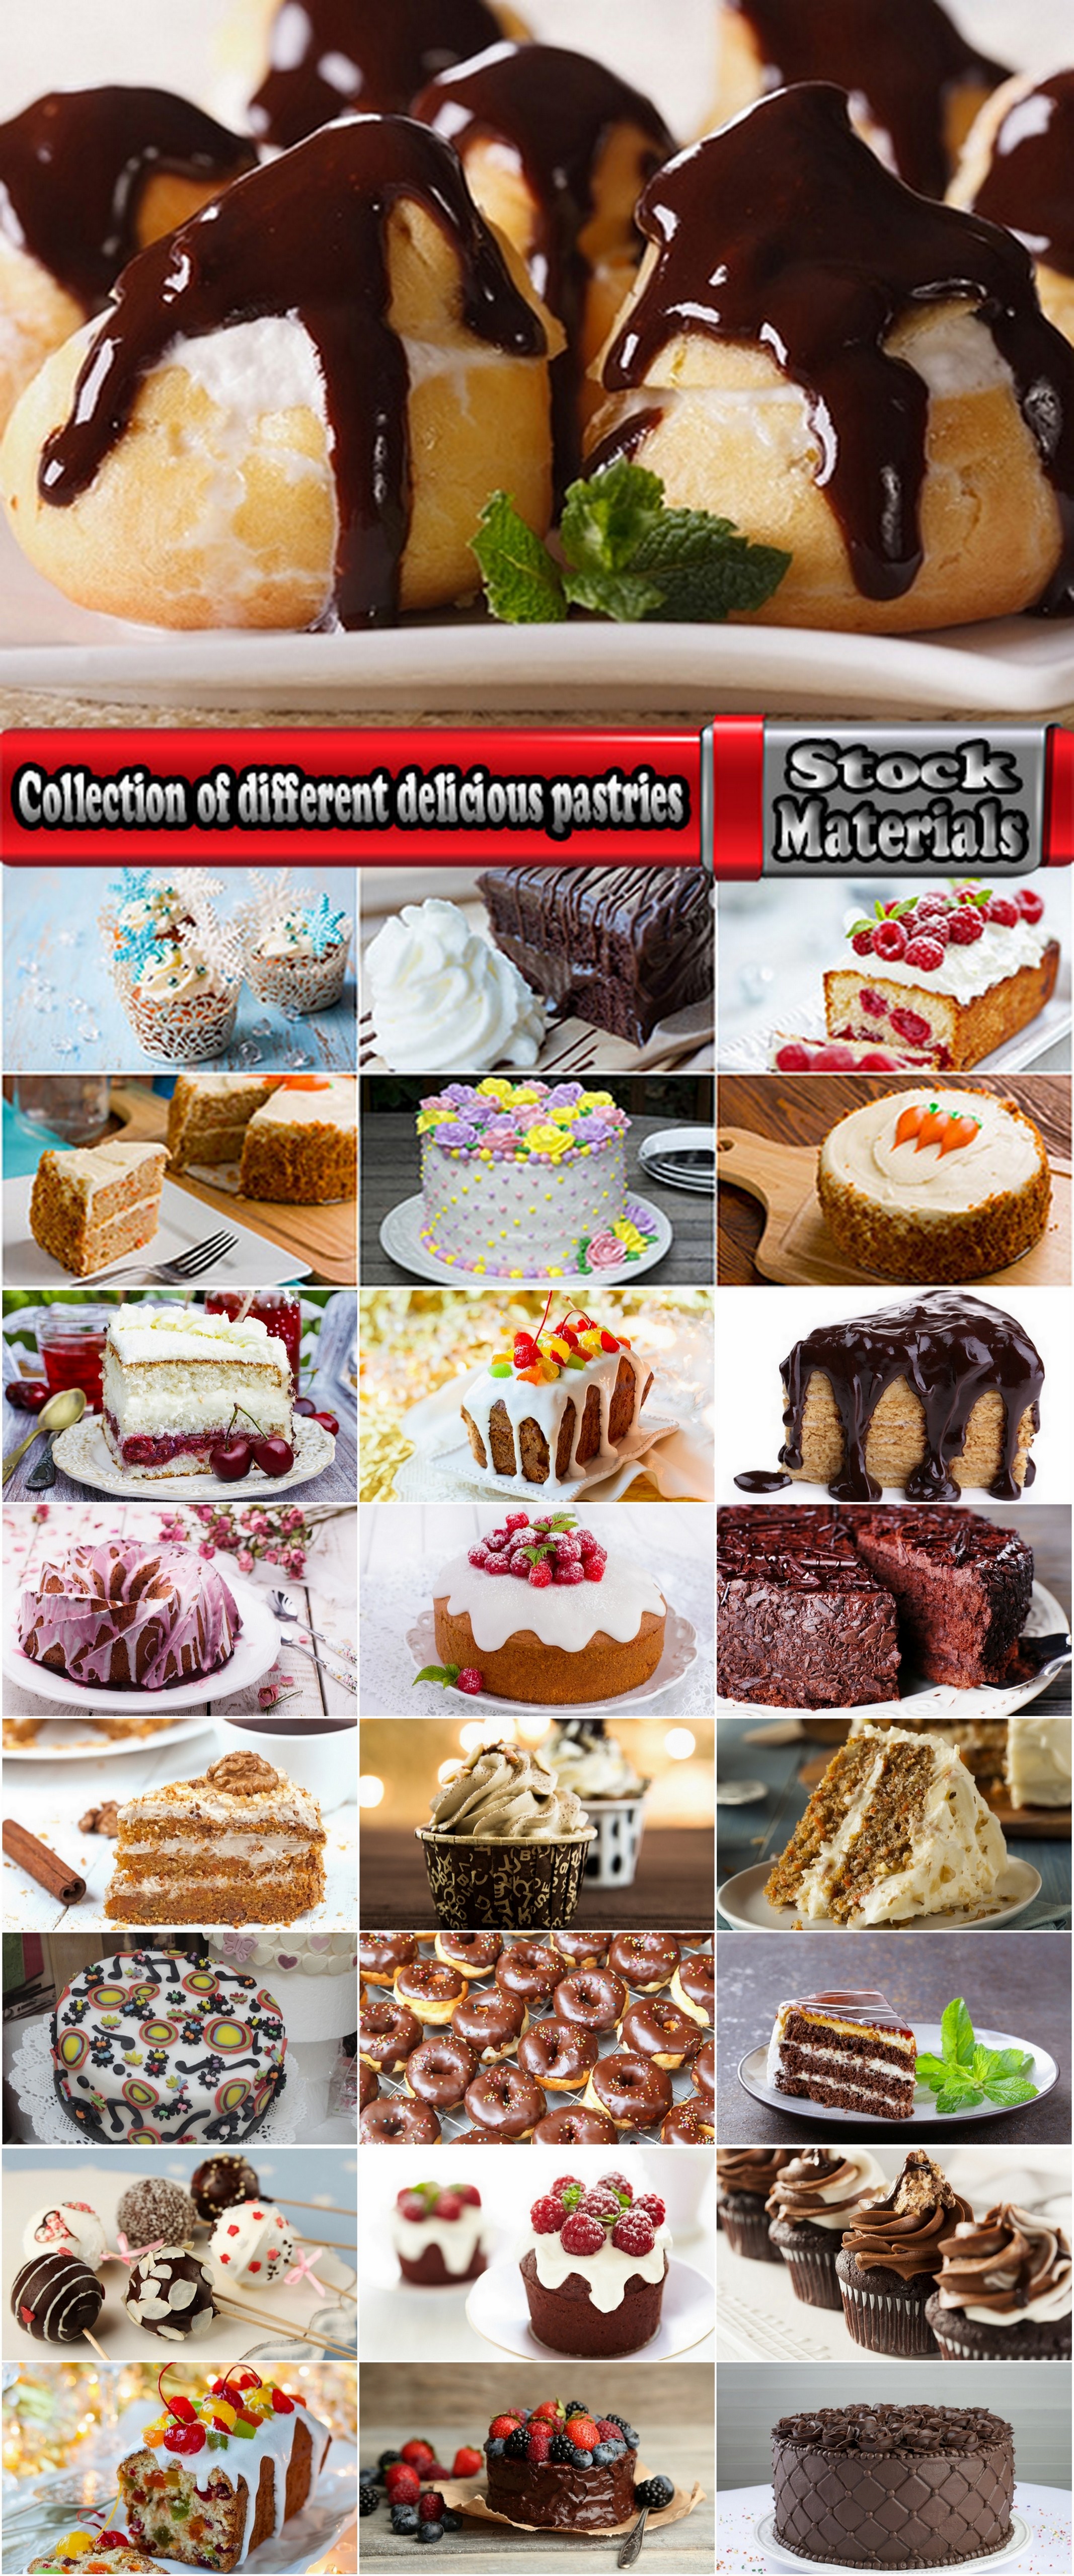 Collection of different delicious pastries confectionery products cake 25 HQ Jpeg